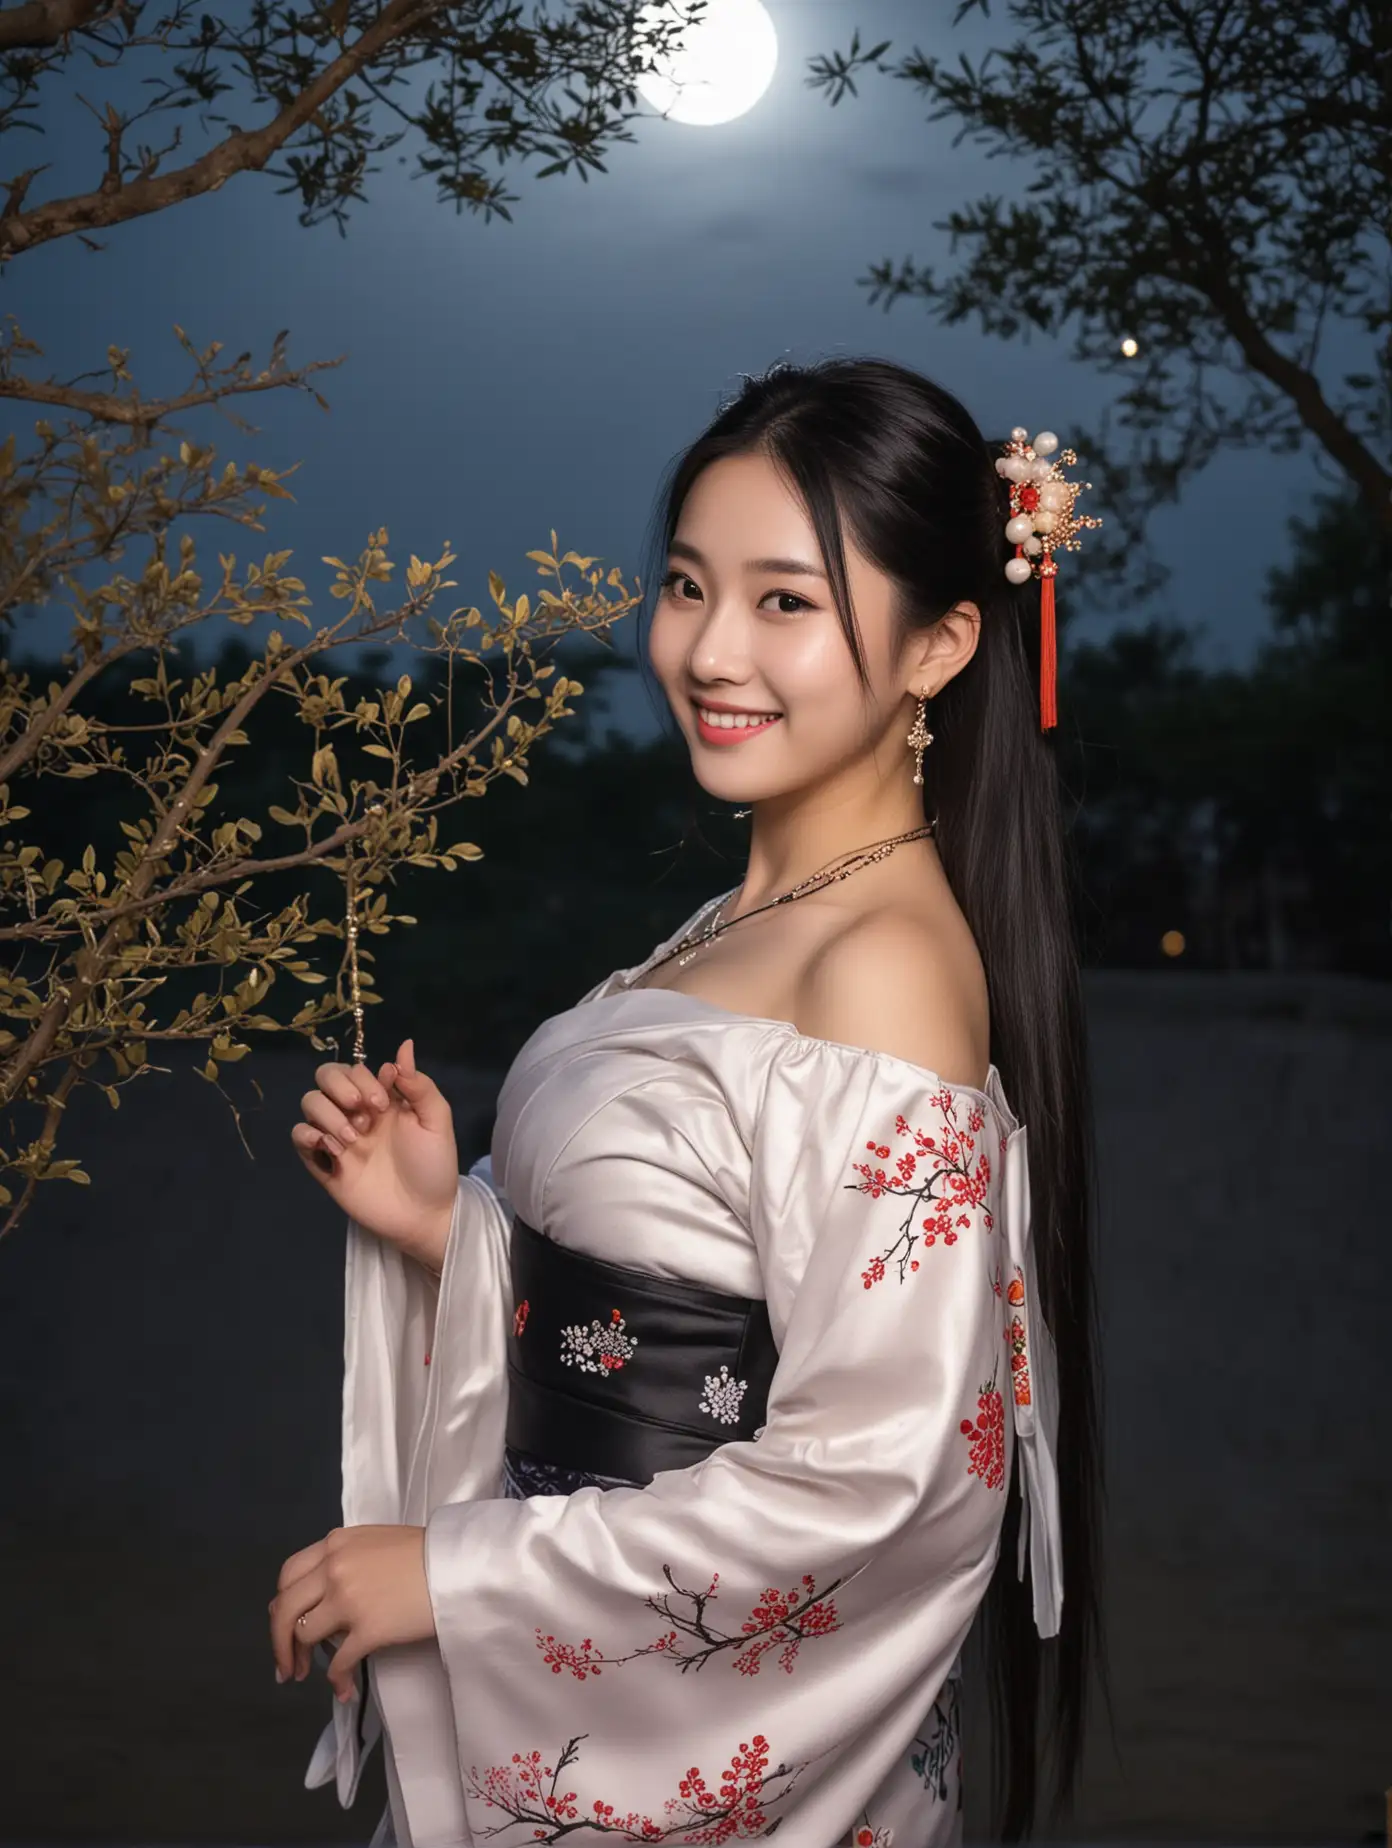 Chinese girl, playing solo, long hair, black hair, hair accessory, qipao, bare shoulders, full-figured, jewelry, standing, smiling, upper body, night, Chinese hanfu, moon, full moon, tree branch, facing the camera